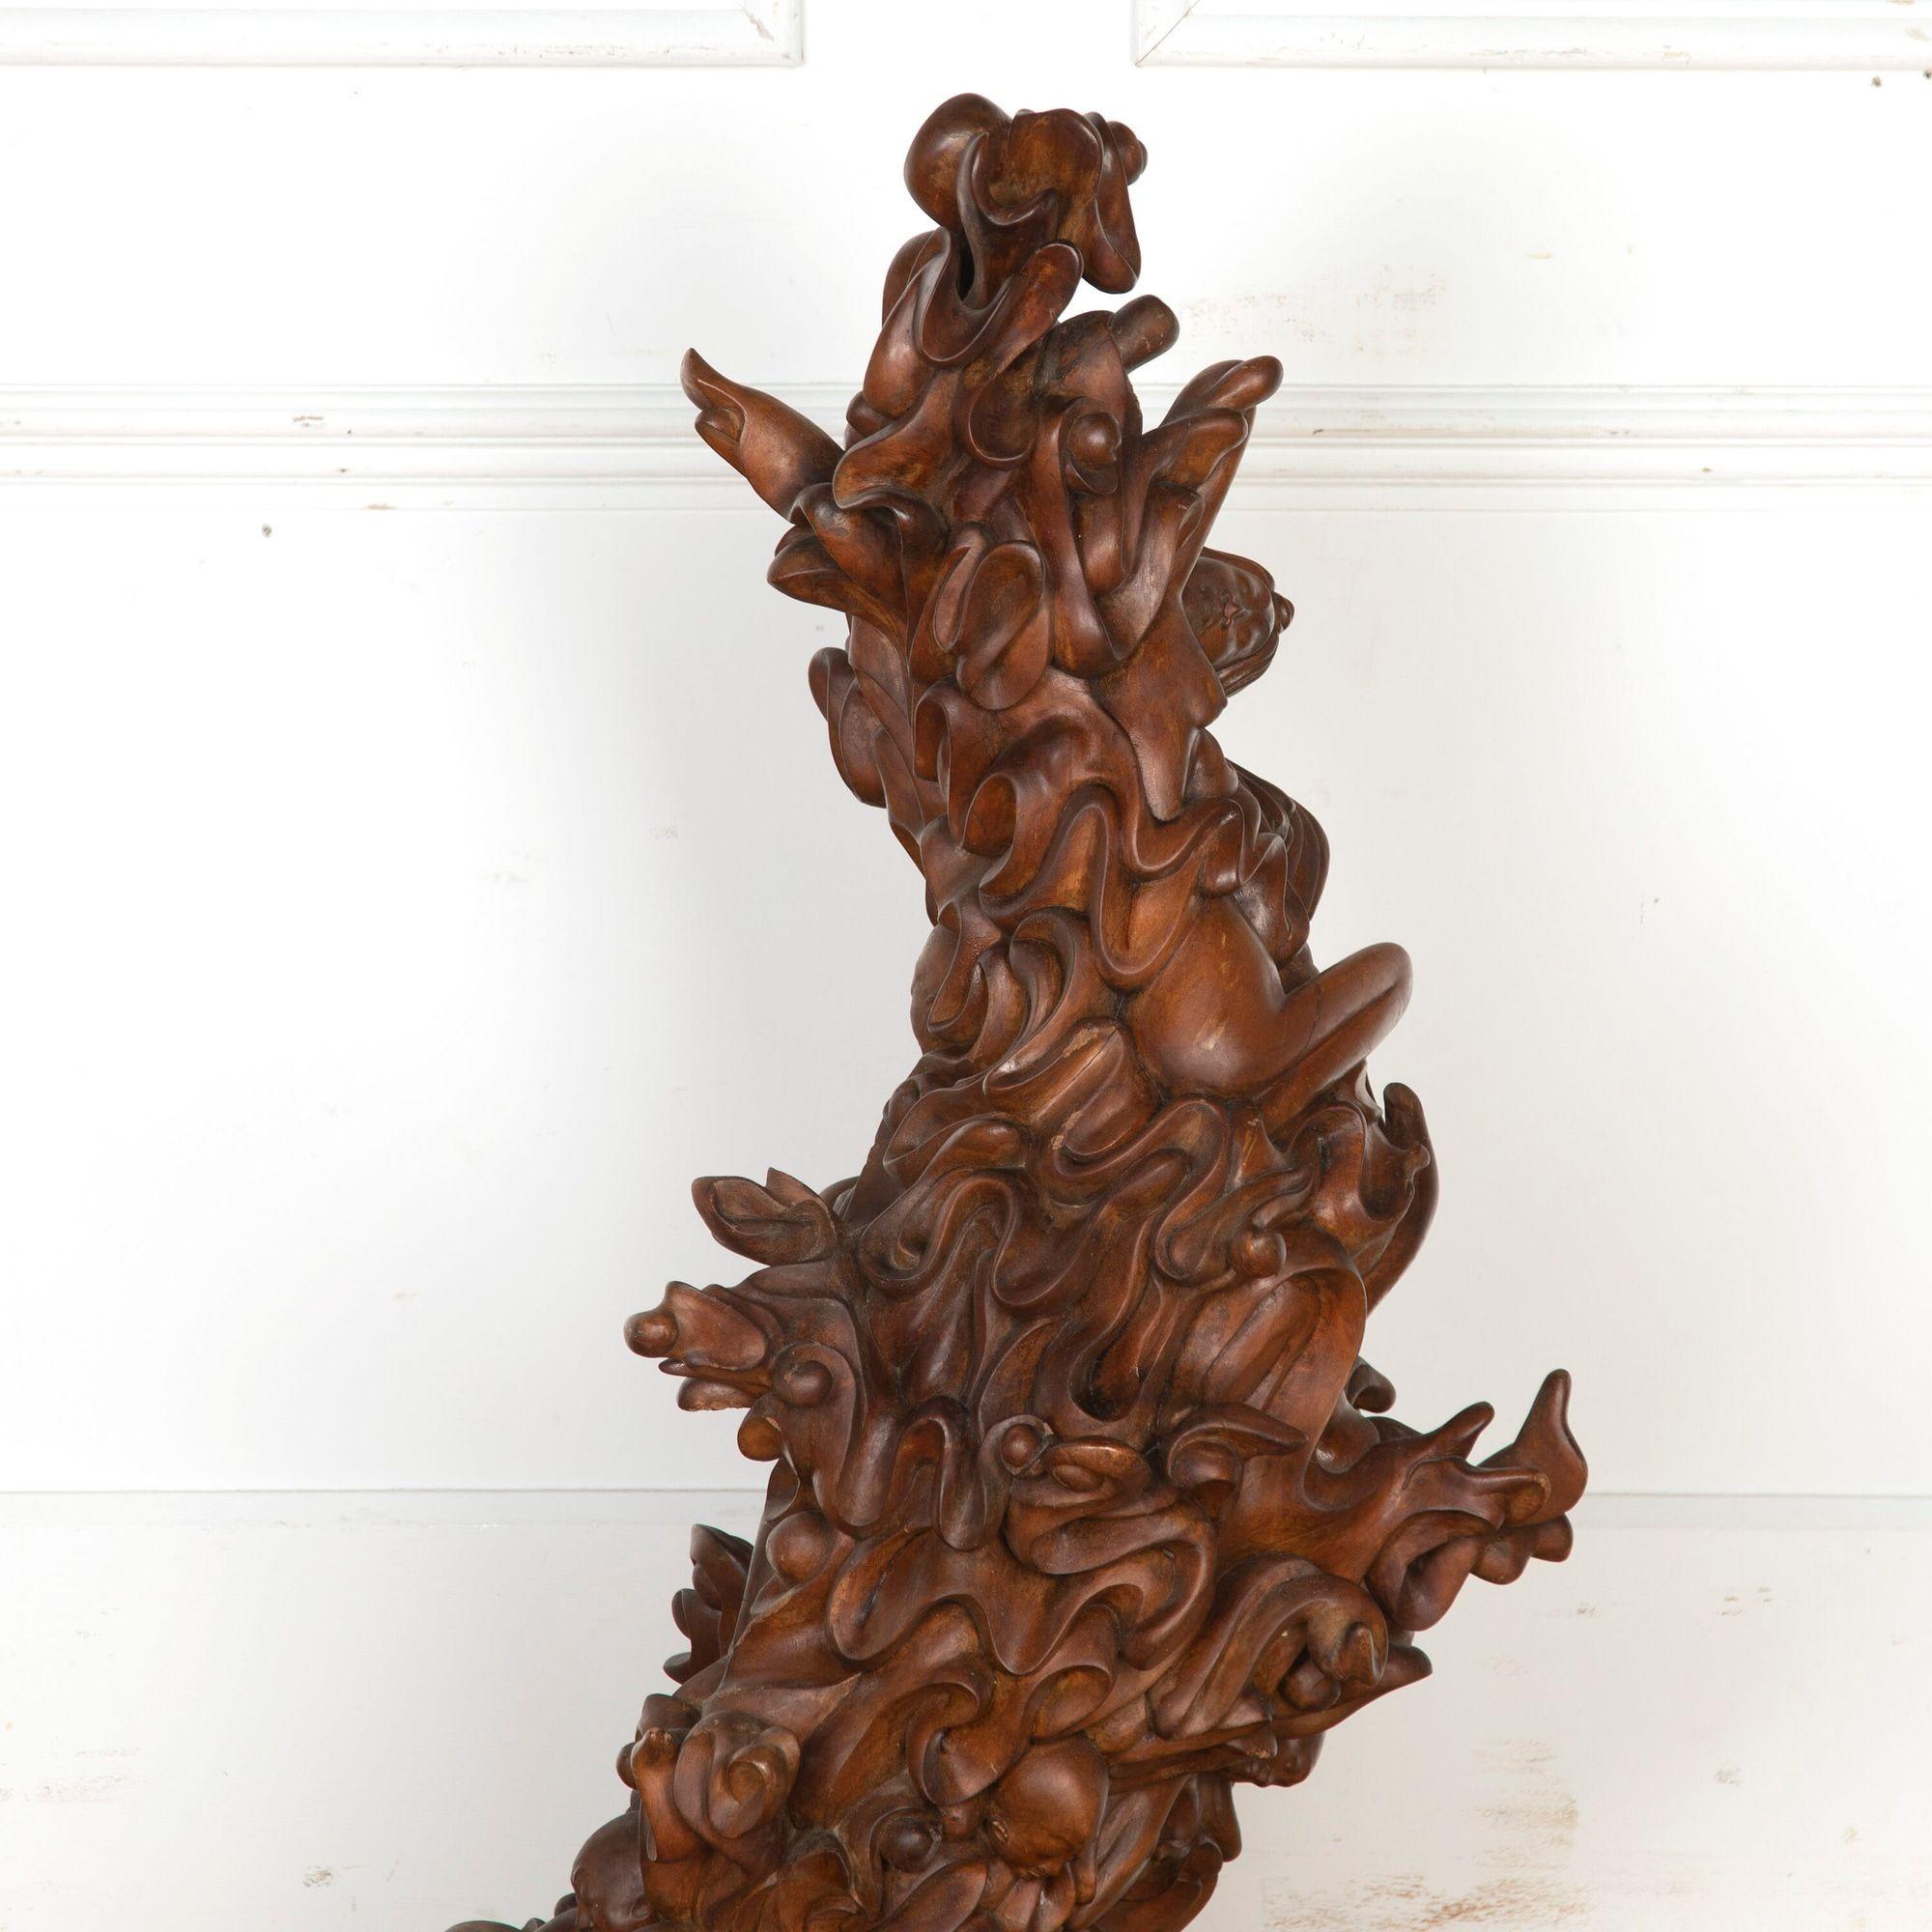 Fantastic 20th Century Javanese biomorphic sculpture. 
This beautiful, hand-carved sculpture depicts waves and floating figures with wonderful movement throughout. 
It is composed of rich and dark wood that is smooth to the touch and beautifully